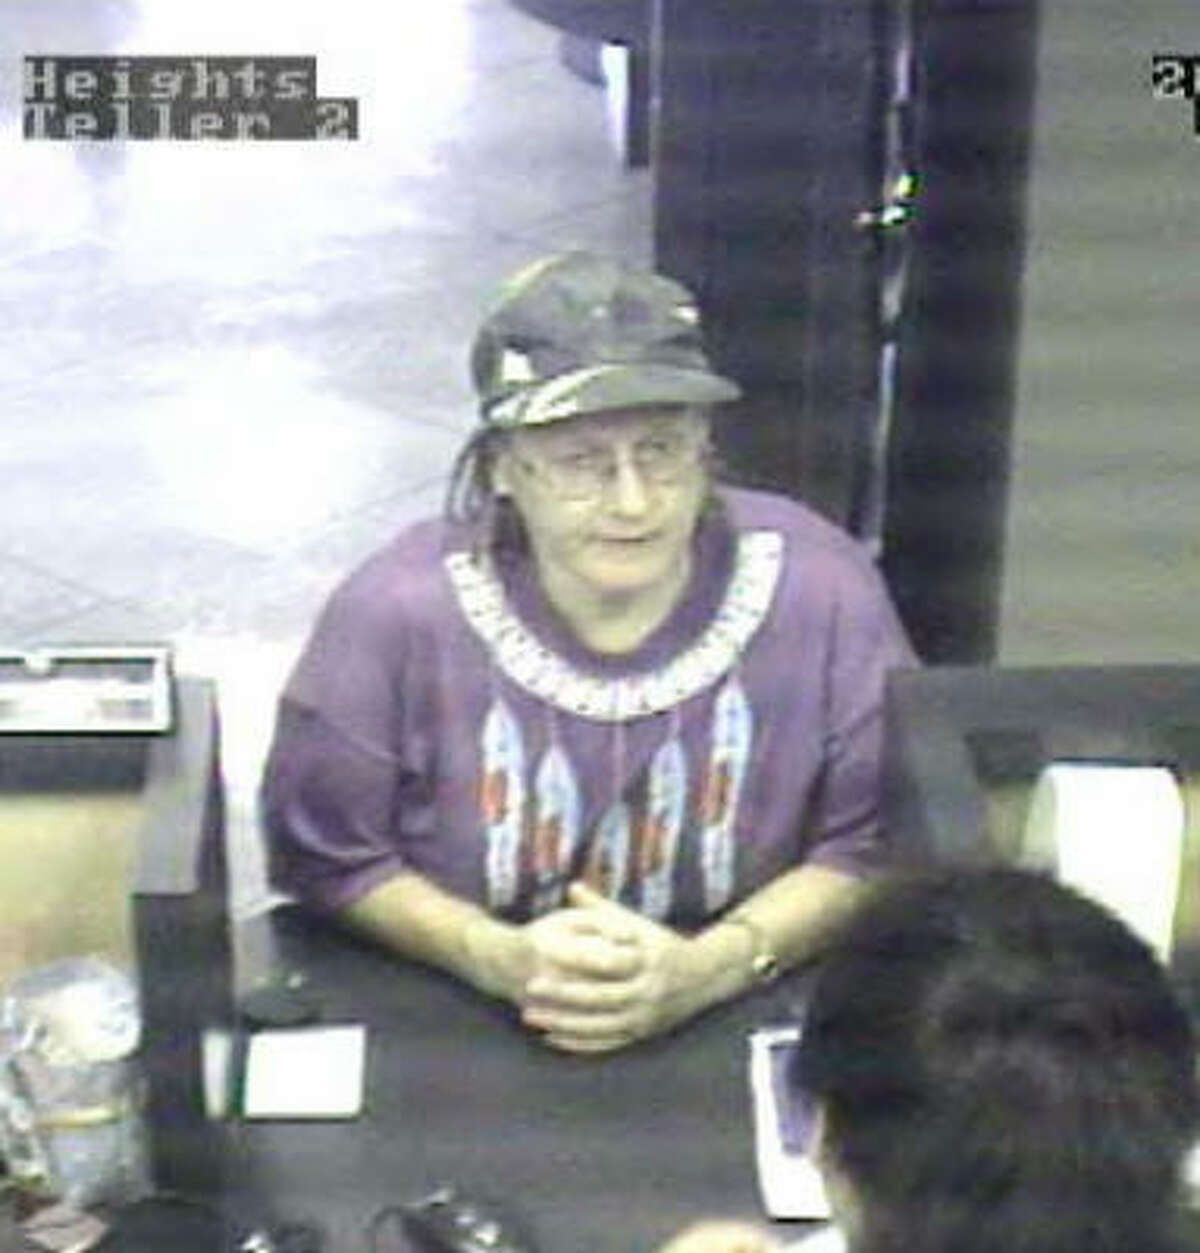 Image from a surveillance camera shows a bank robber authorities have dubbed the "Grandma Bandit." She struck two Compass Bank branches in Houston on Friday.